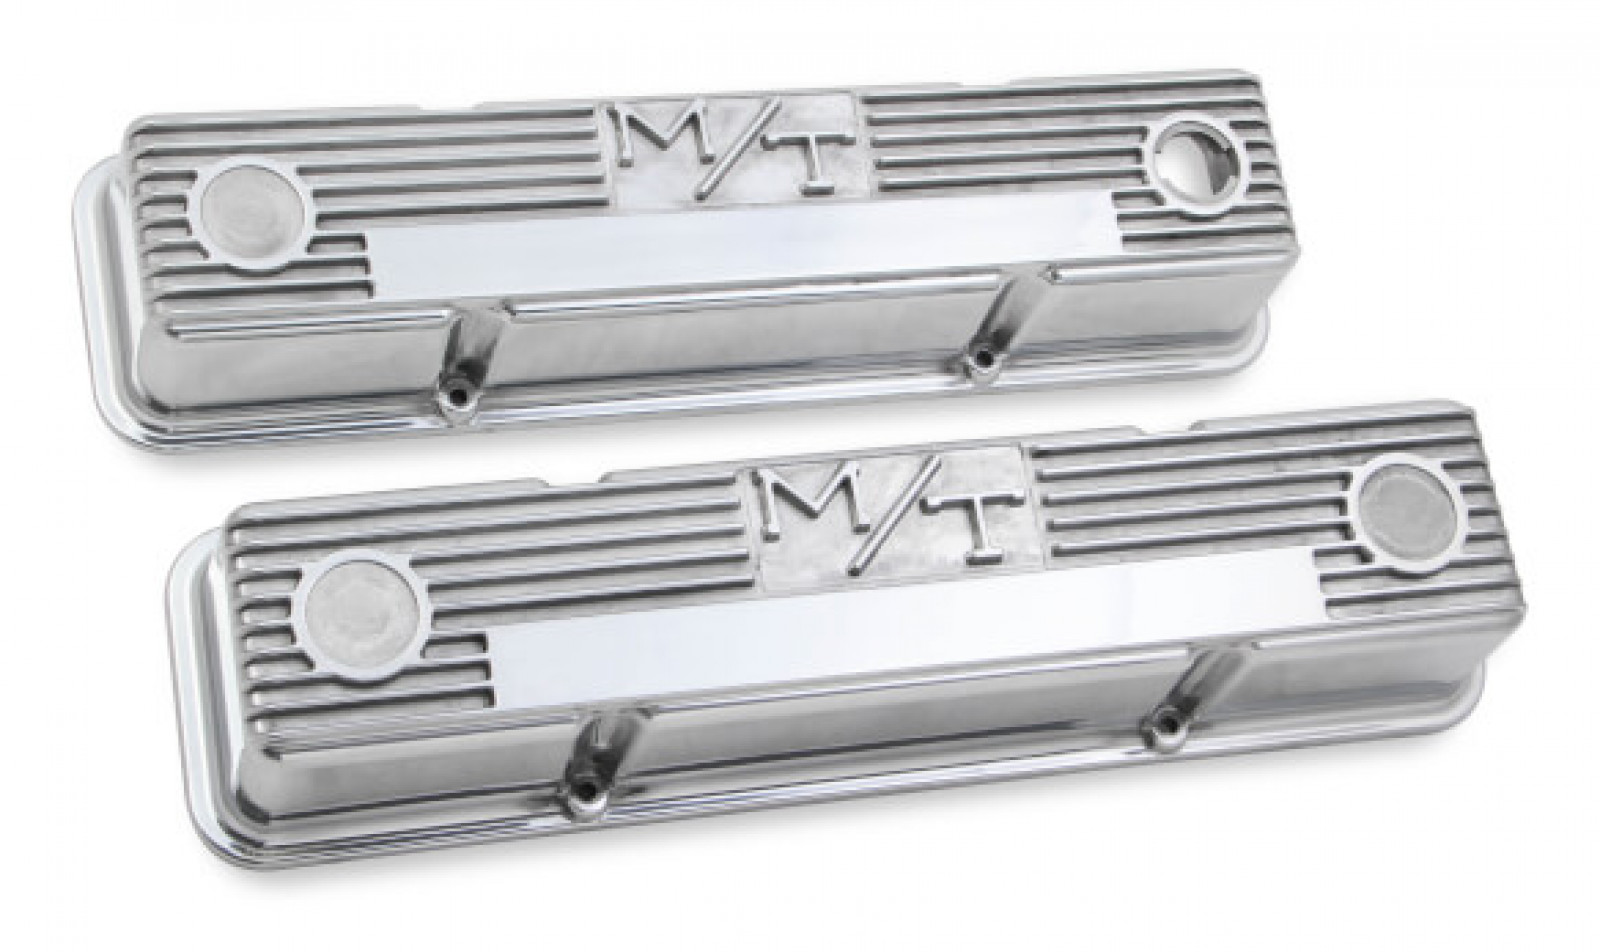 Buy Holley M/T Valve Covers Vintage Style Finned SBC Polished for  237.95 at Armageddon Turbo  Performance